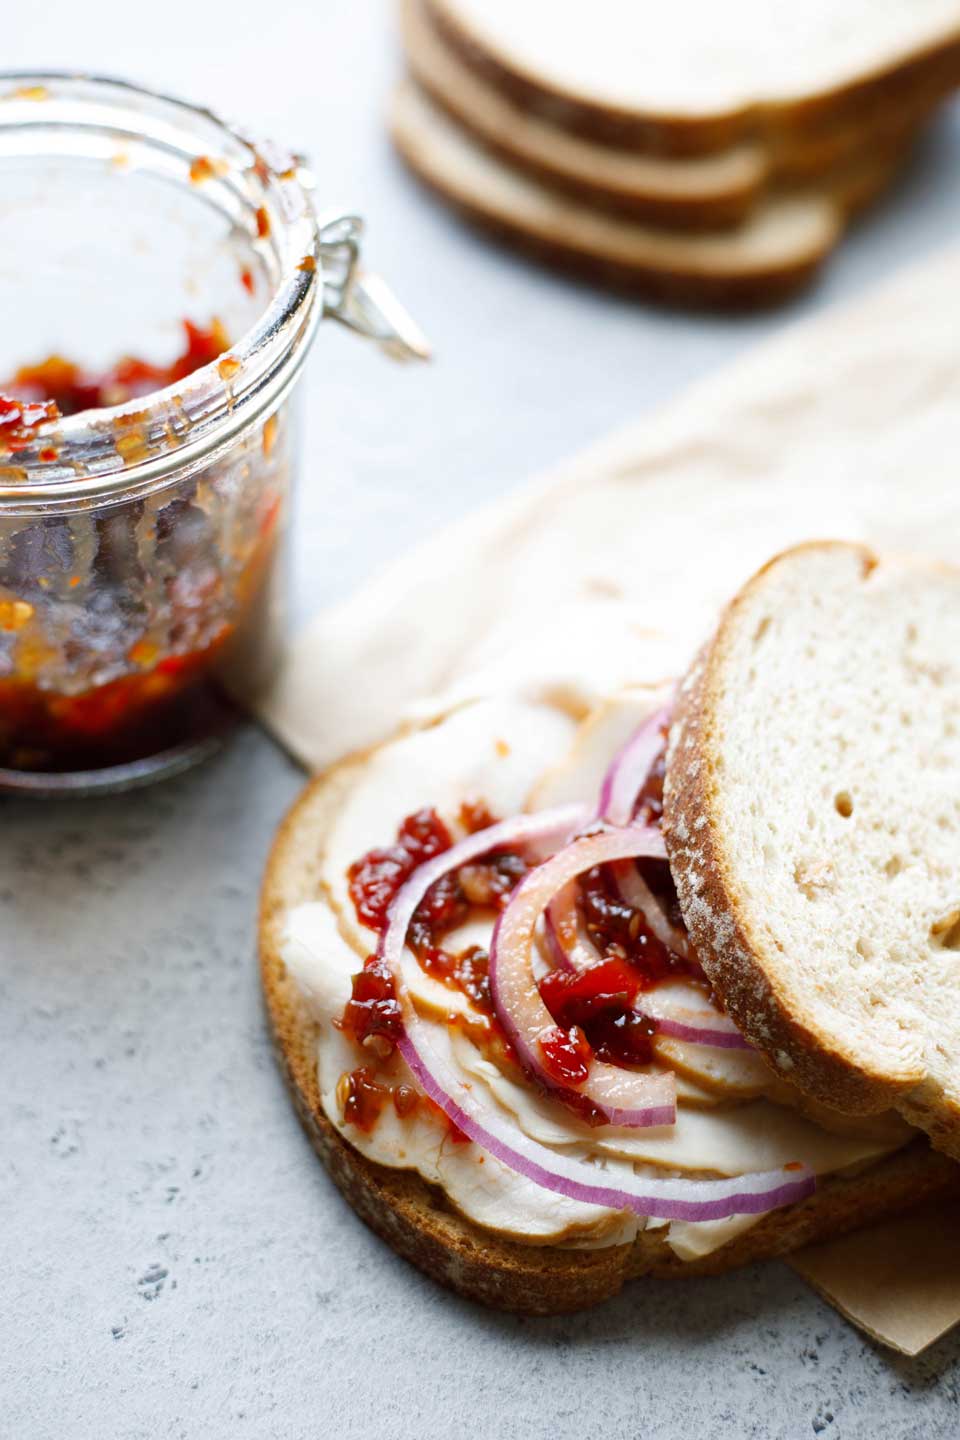 Turkey sandwich topped with red onion slices and hot pepper relish, with a nearly empty jar of relish in background.